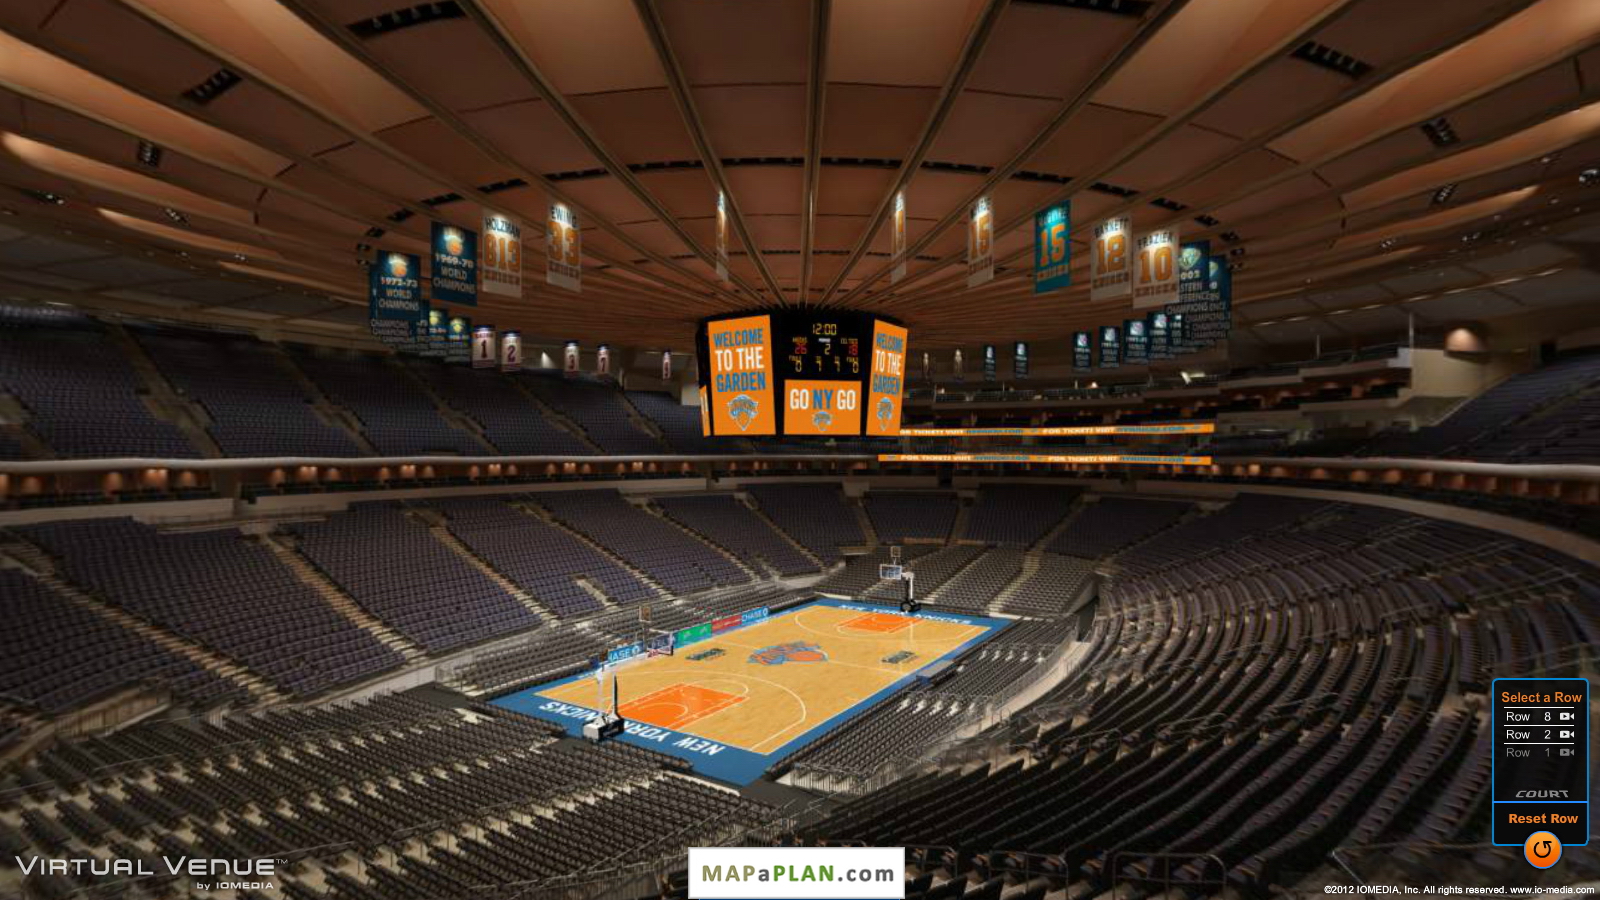 Madison Square Garden seating chart View from section 220